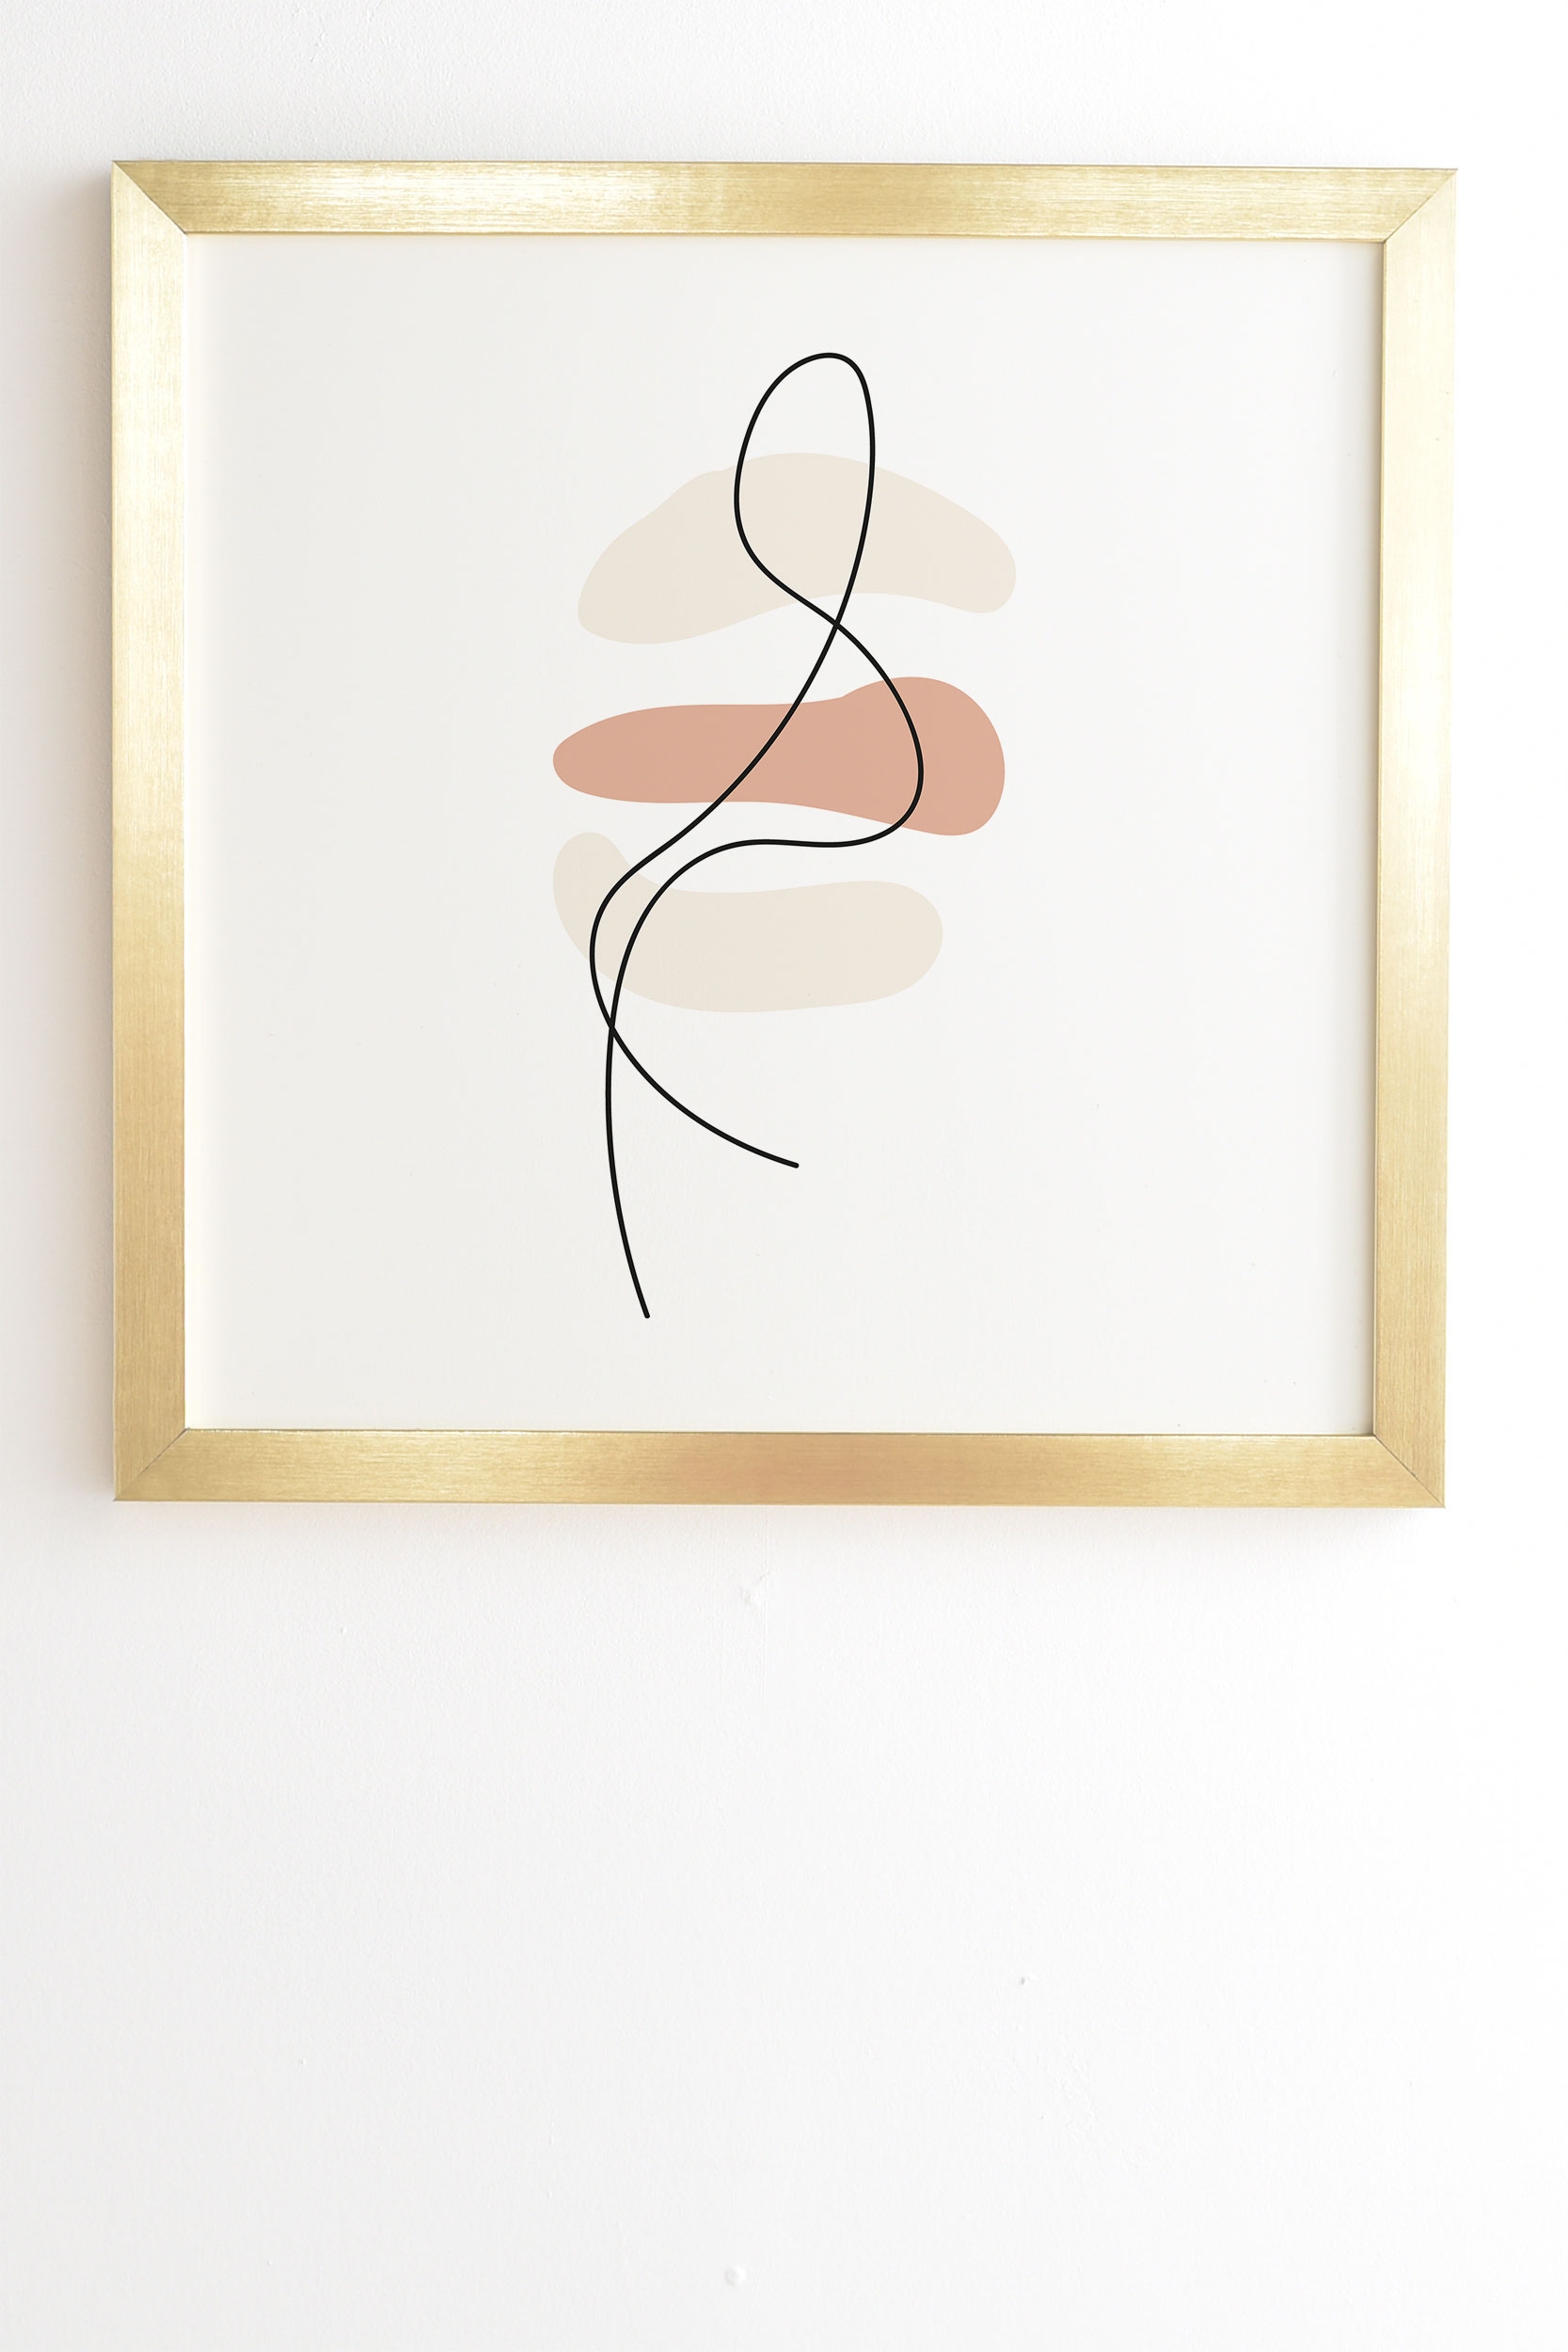 Abstract Minimal Line Beige by Mambo Art Studio - Framed Wall Art Basic Gold 19" x 22.4" - Image 1